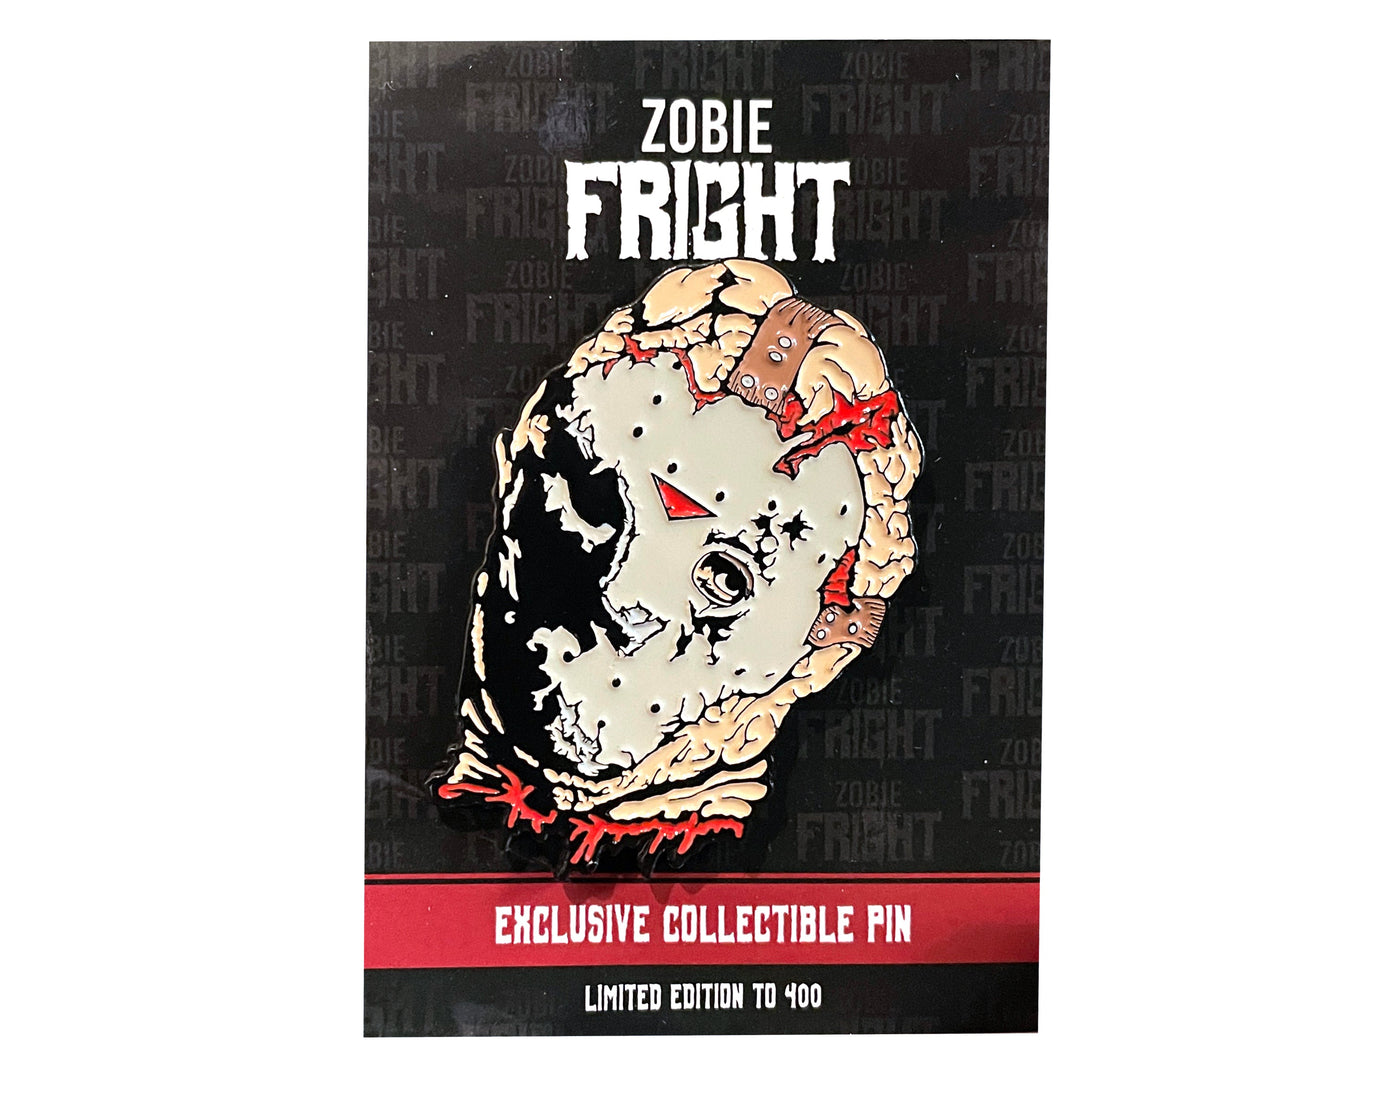 Zobie Fright Exclusive 2" Enamel Pin - Friday the 13th "Jason Voorhees"